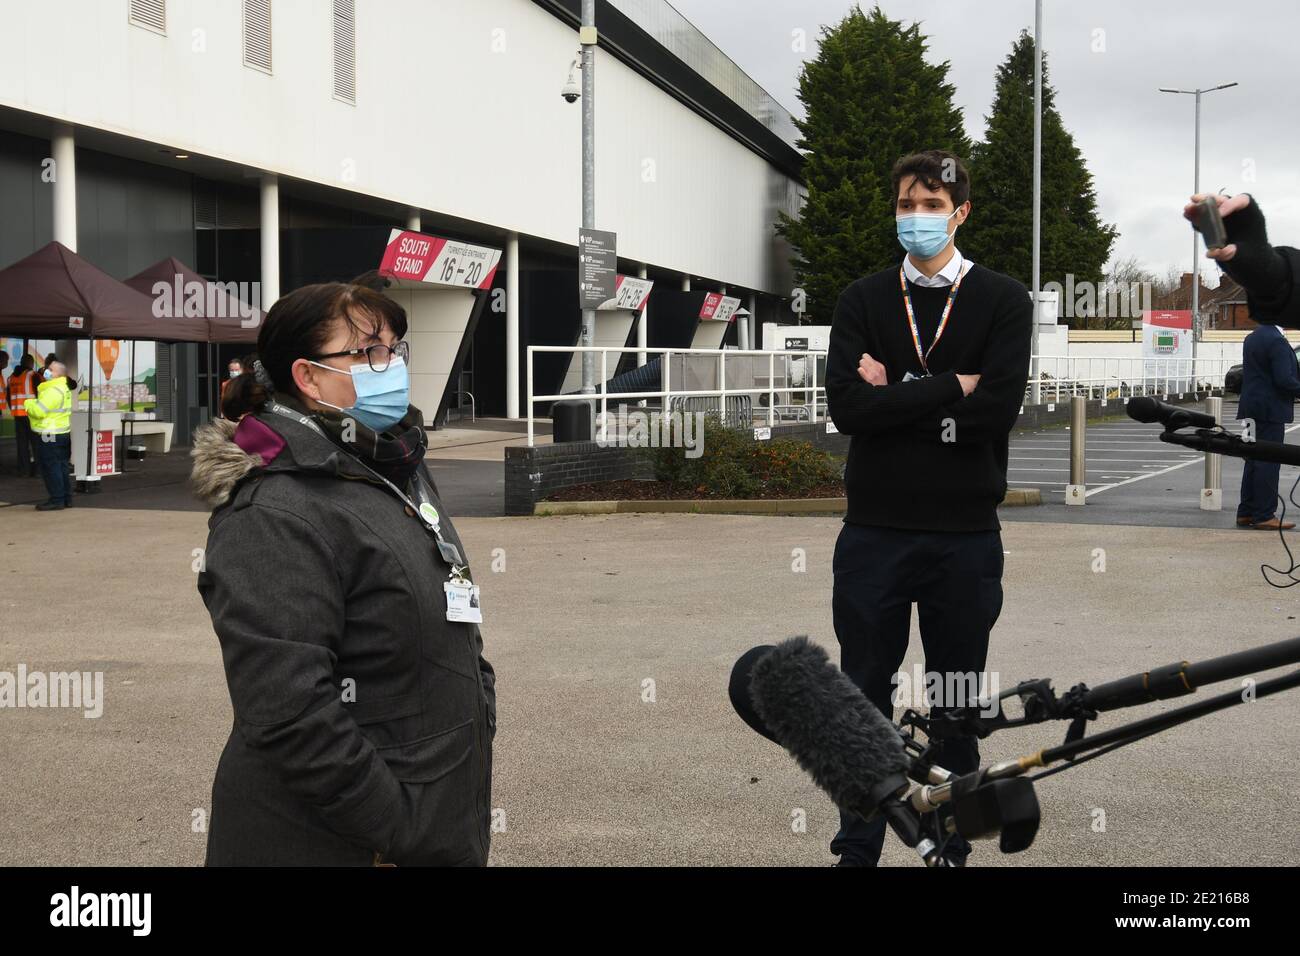 Bristol, UK. 11th Jan, 2021. Mass Vaccination rollout at Ashton Gate Football Stadium. Roslyn Wiaznik, Manager of Alliance Living Care Weston Super Mare Branch seen talking to Media. Picture Credit: Robert Timoney/Alamy Live News Stock Photo